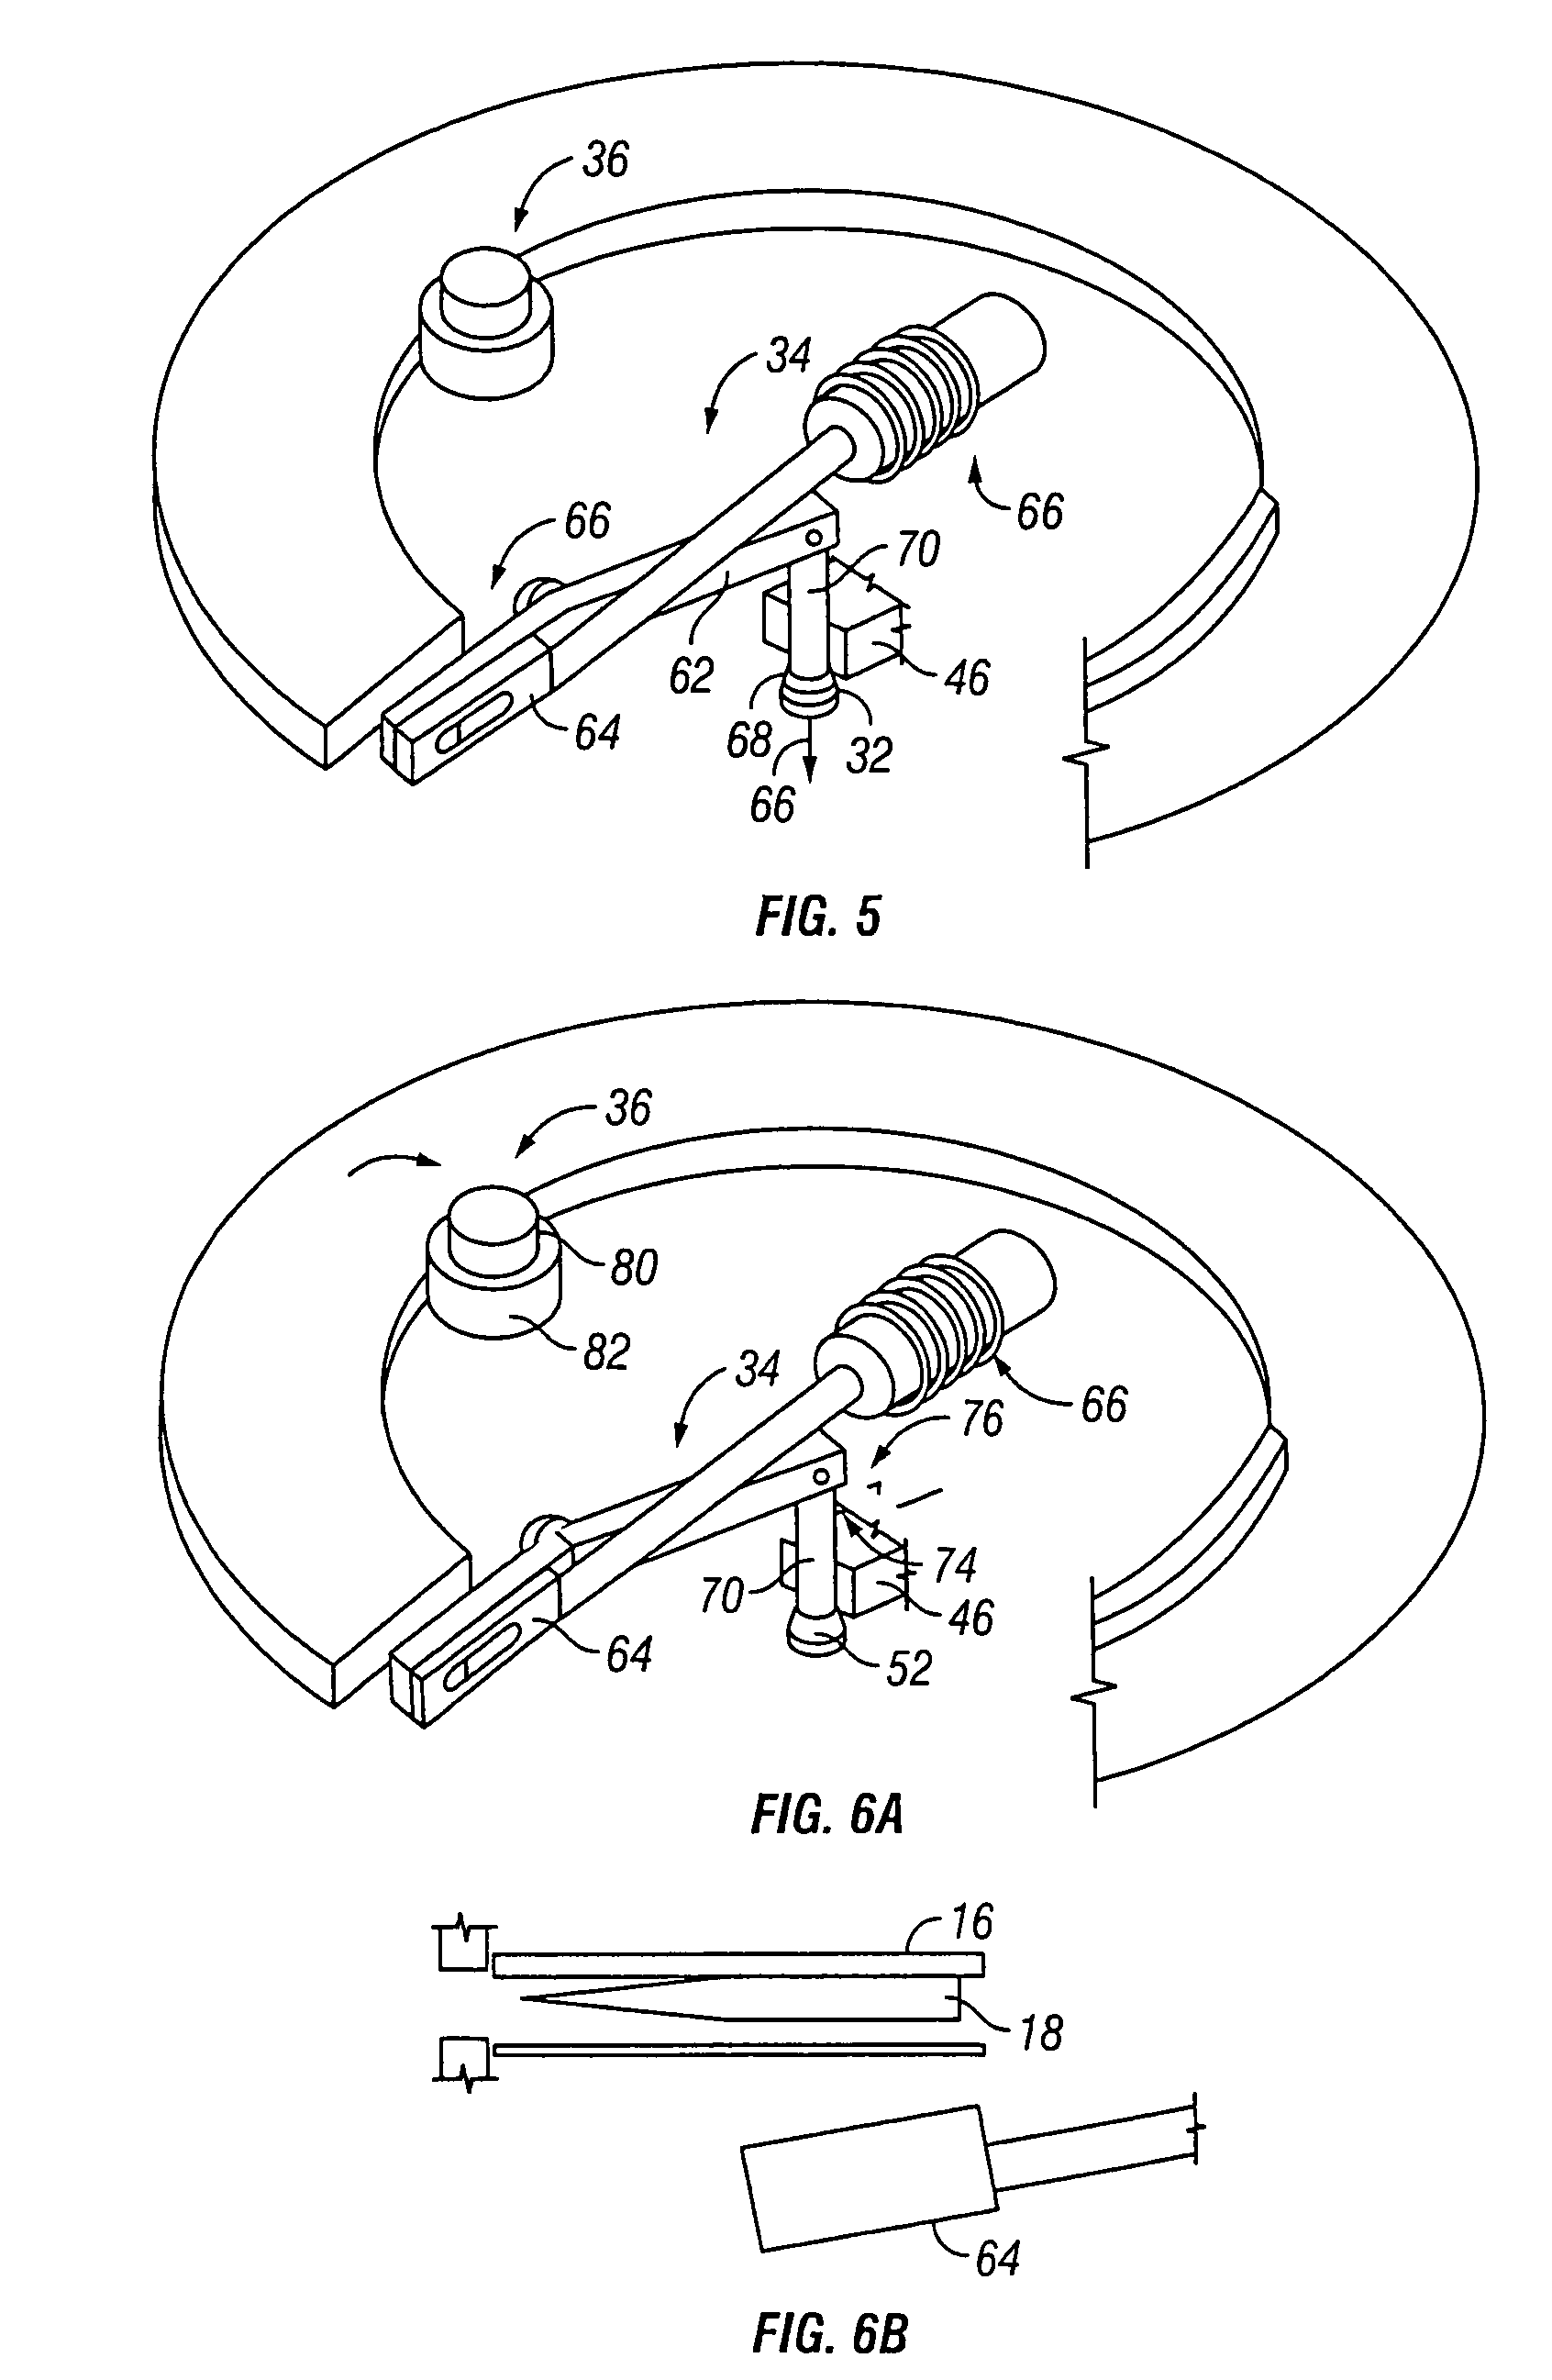 Method and apparatus for body fluid sampling with improved sensing